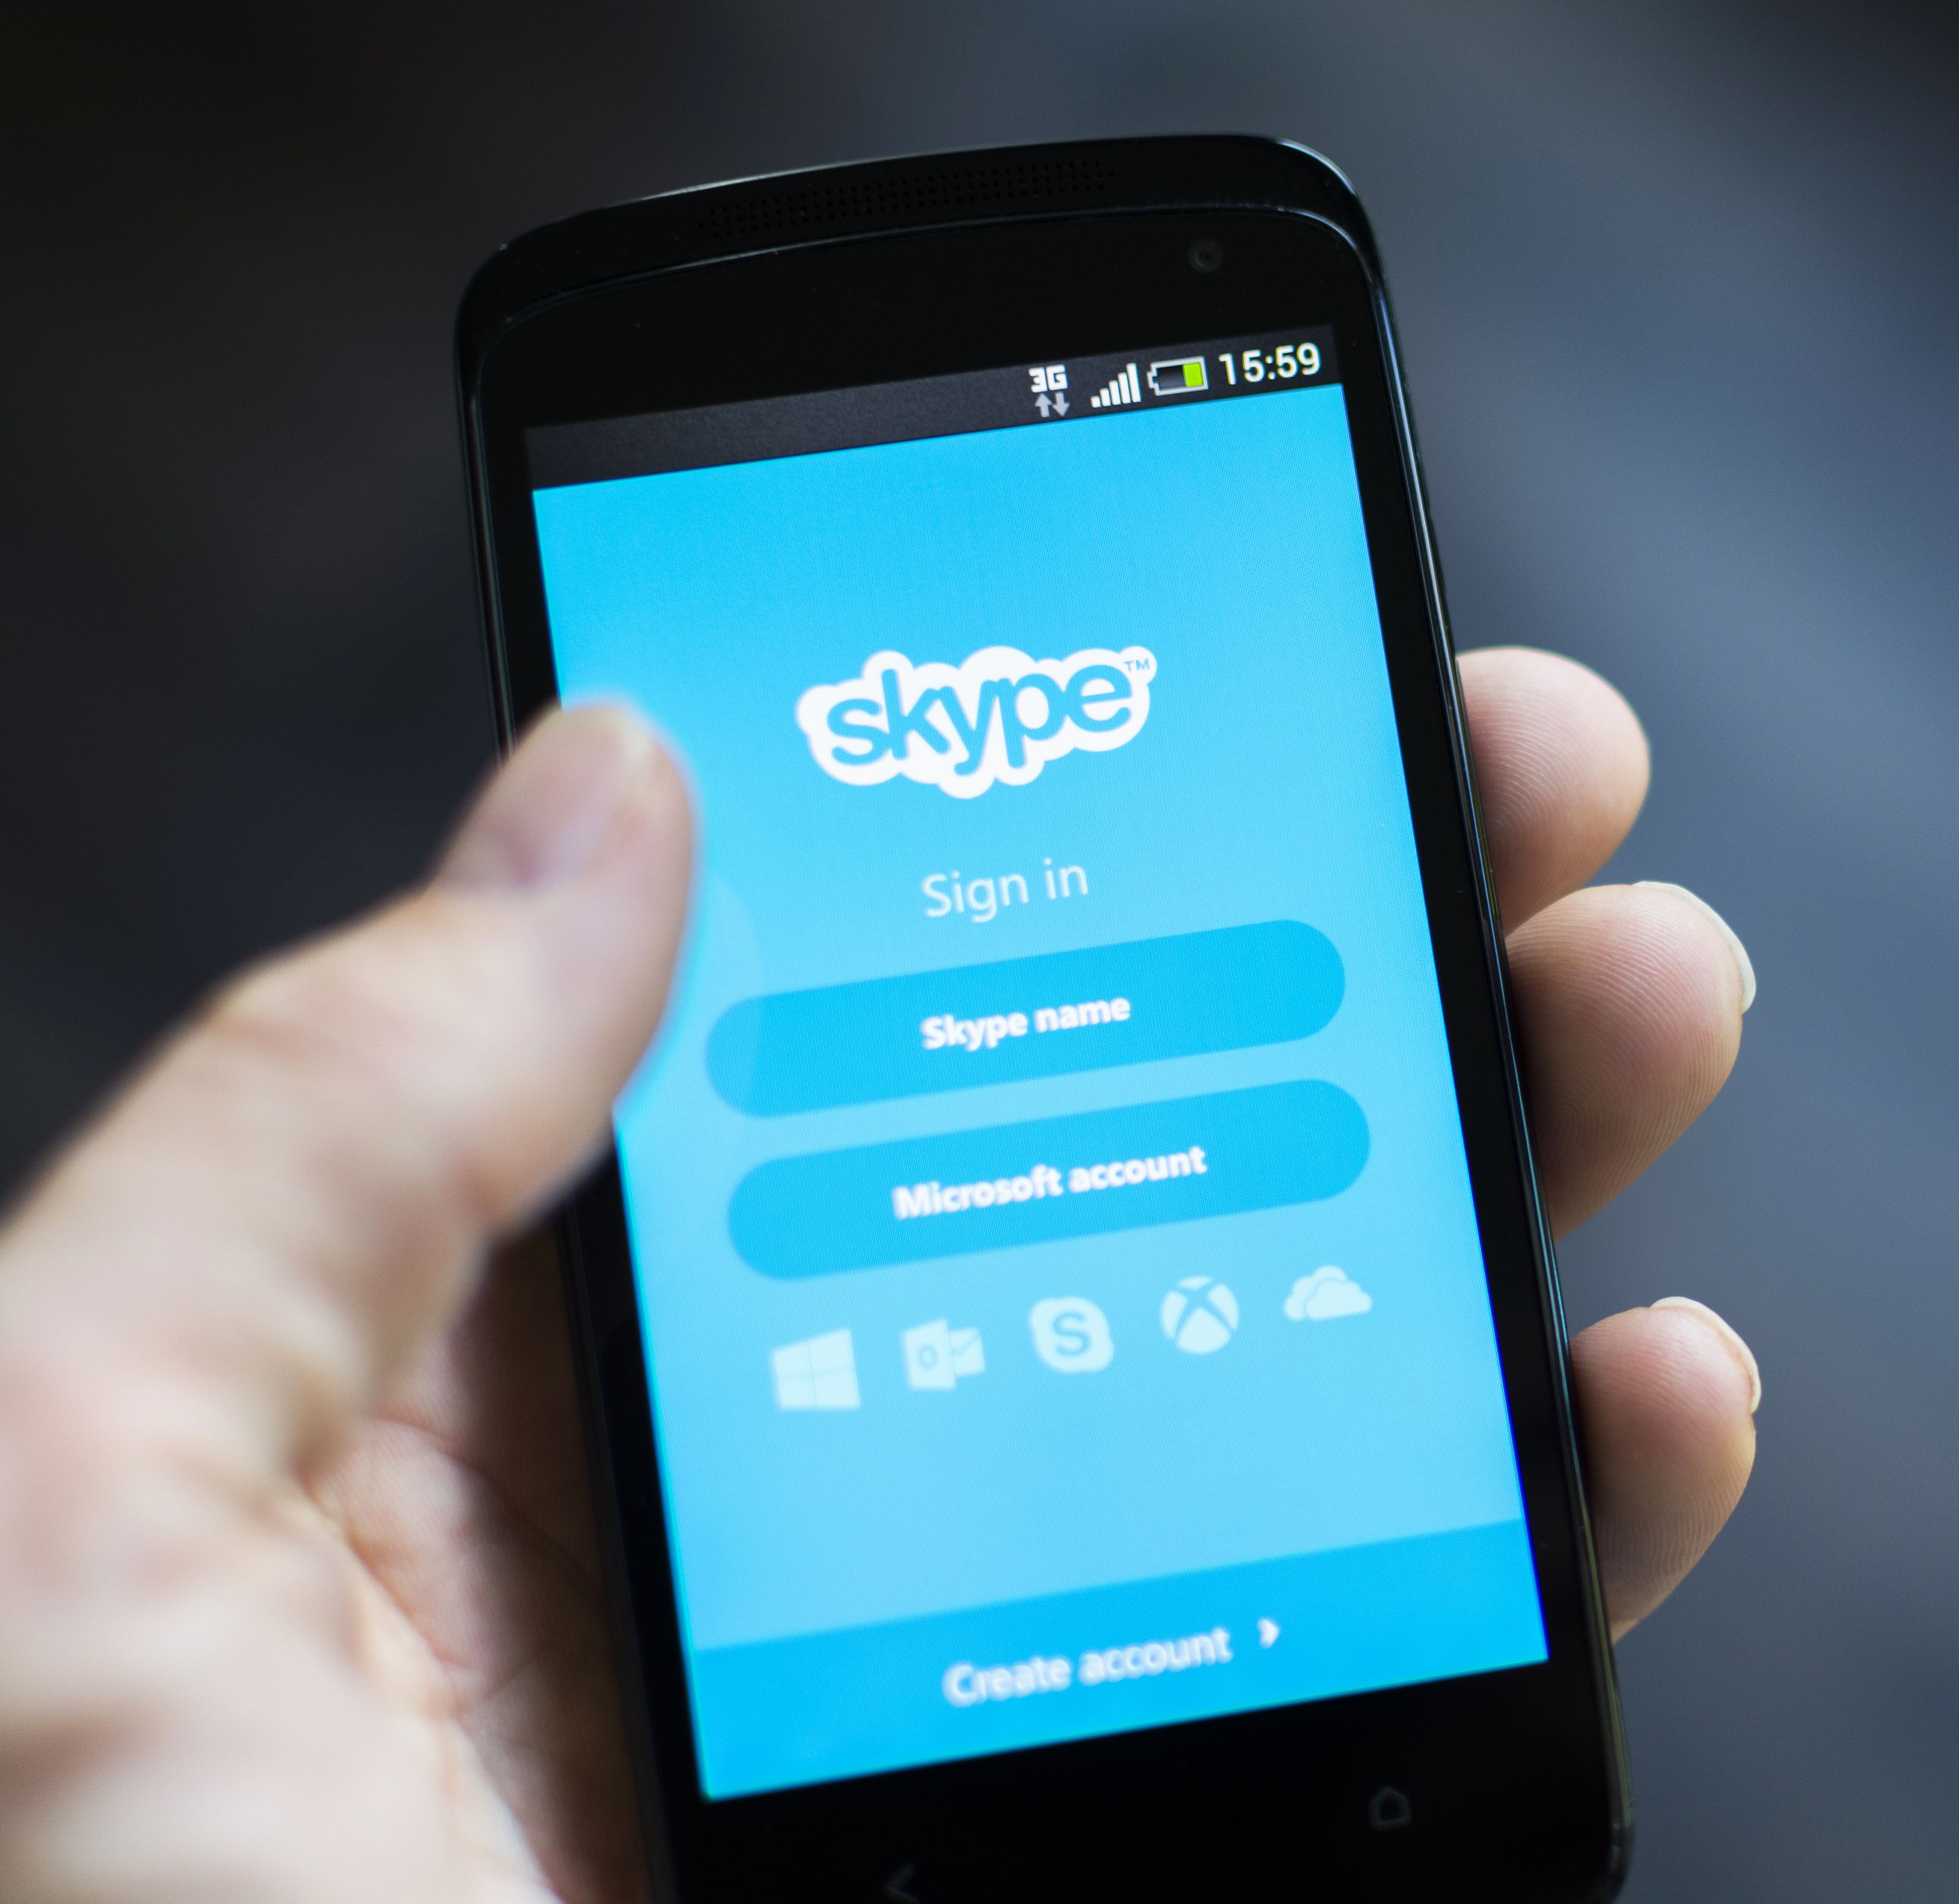 Buy Skype Credit at Western Union -- Microsoft offers limited-time bonus
